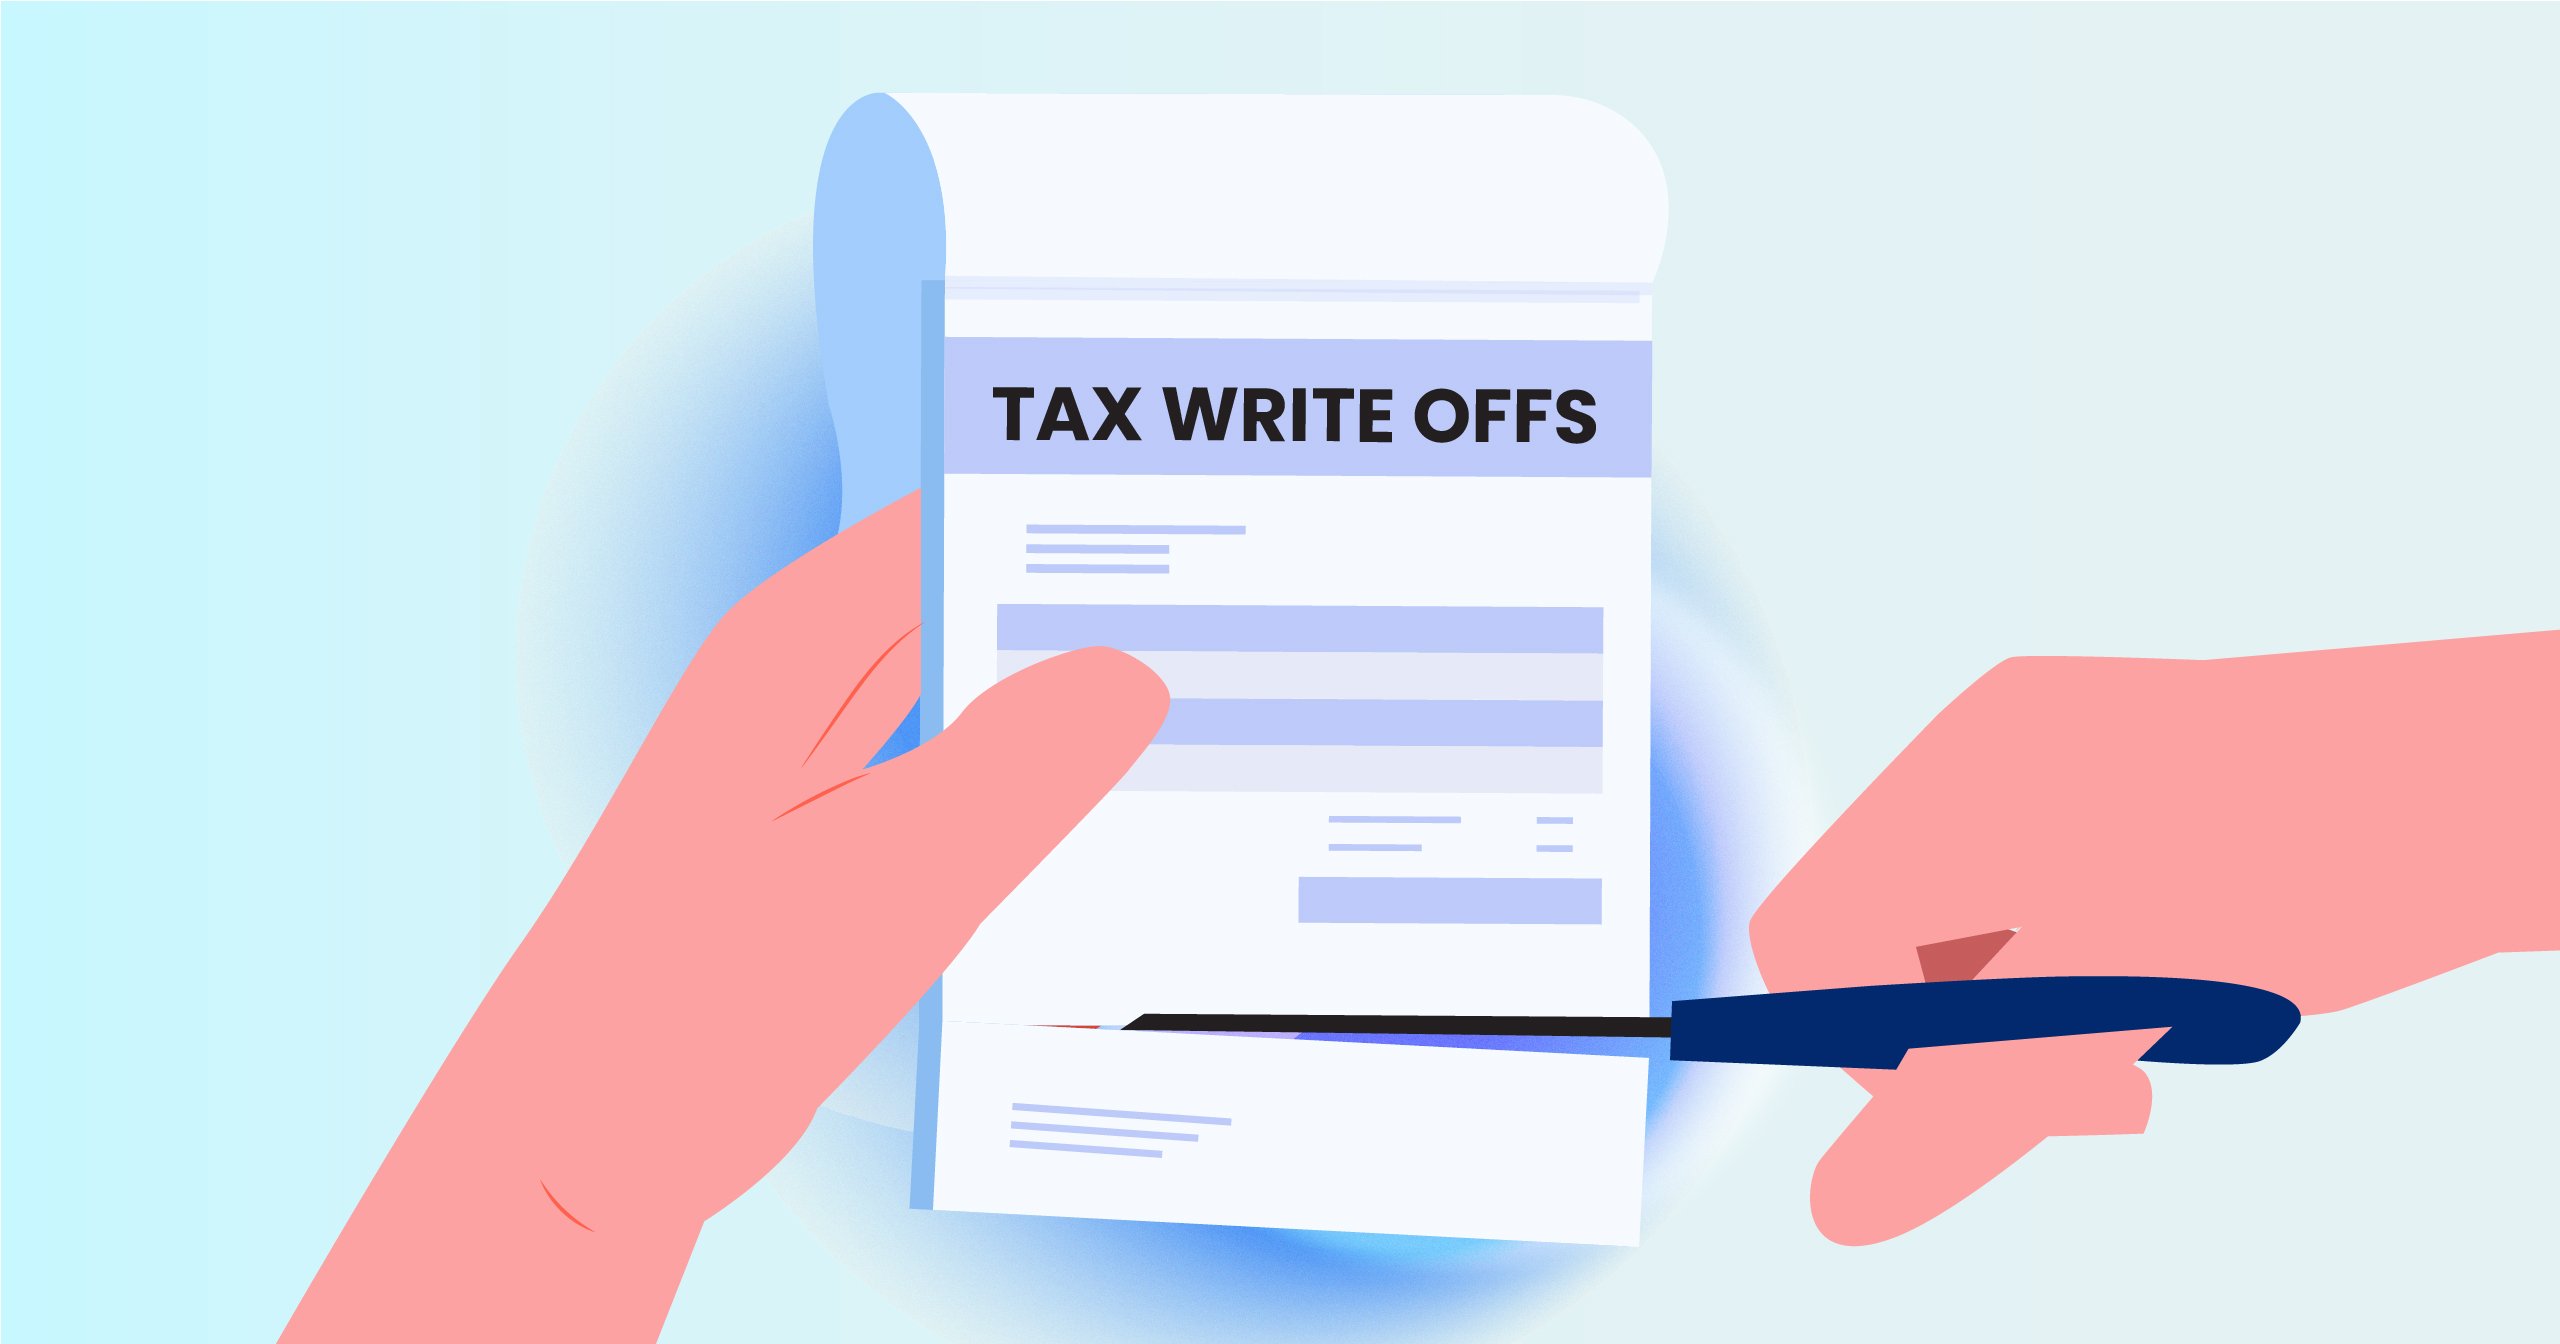 How To Use Tax Write-Offs To Lower Your Startup Tax Burden